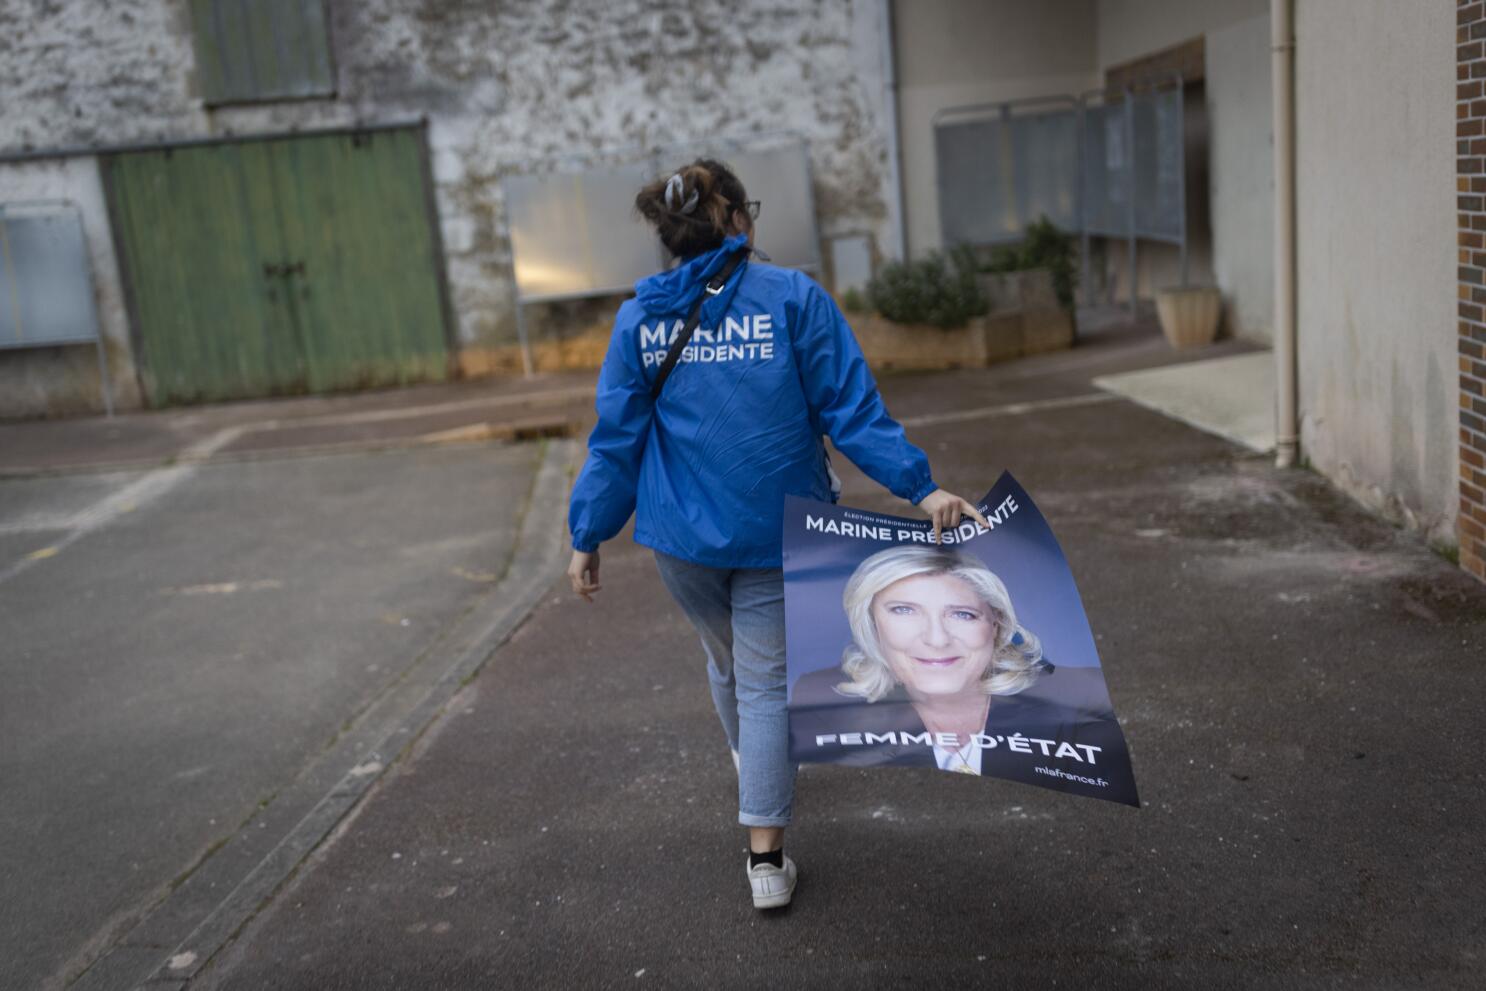 French far-right leader Marine Le Pen to stand trial for